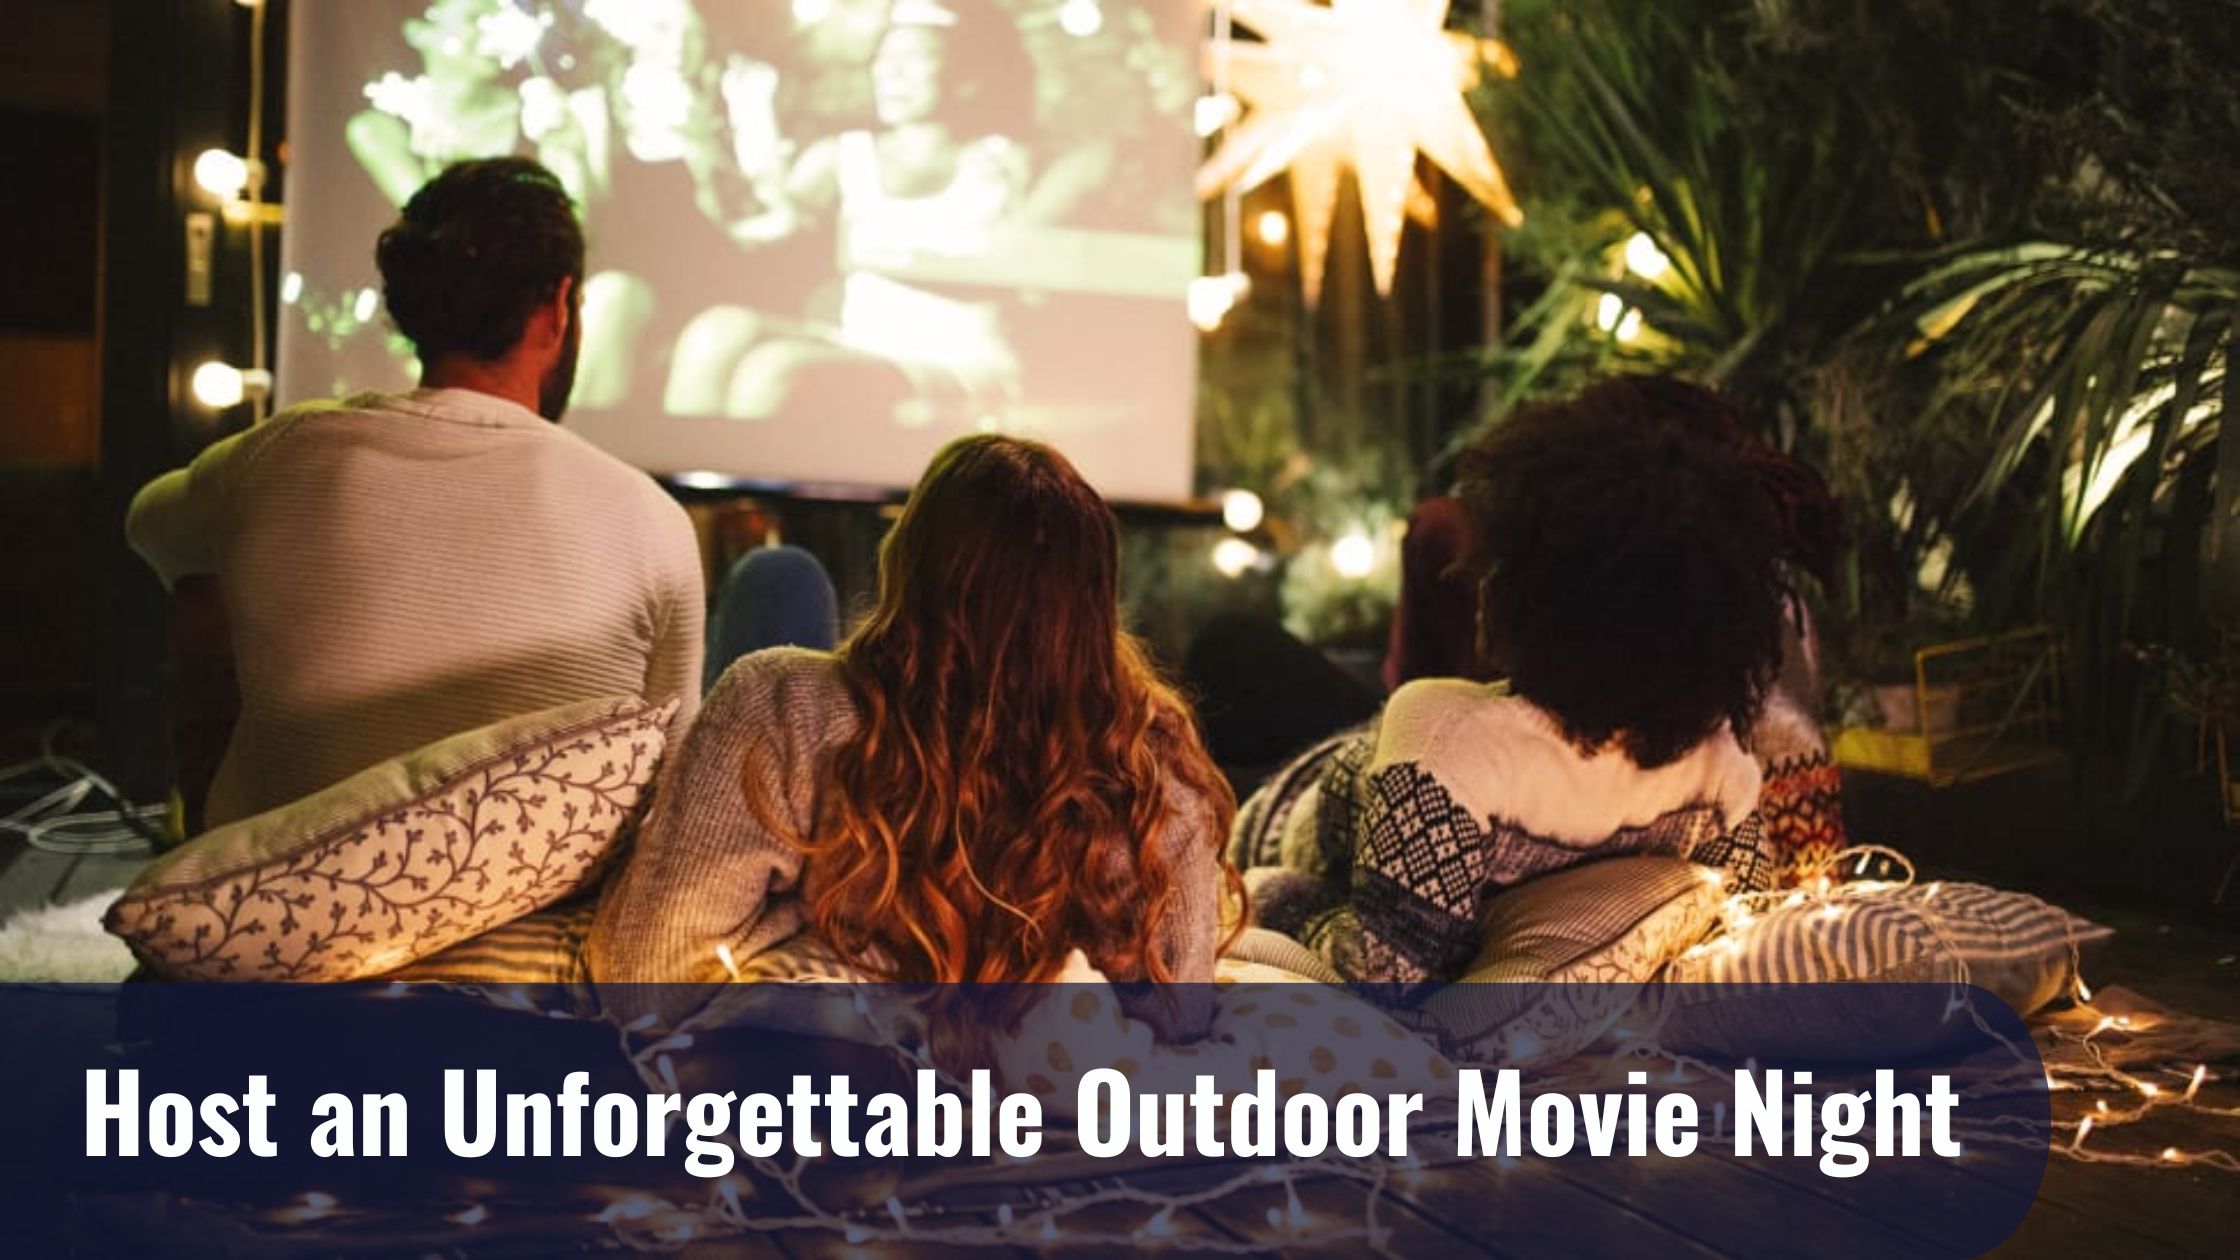 Light Up the Night: How to Host an Unforgettable Outdoor Movie Night